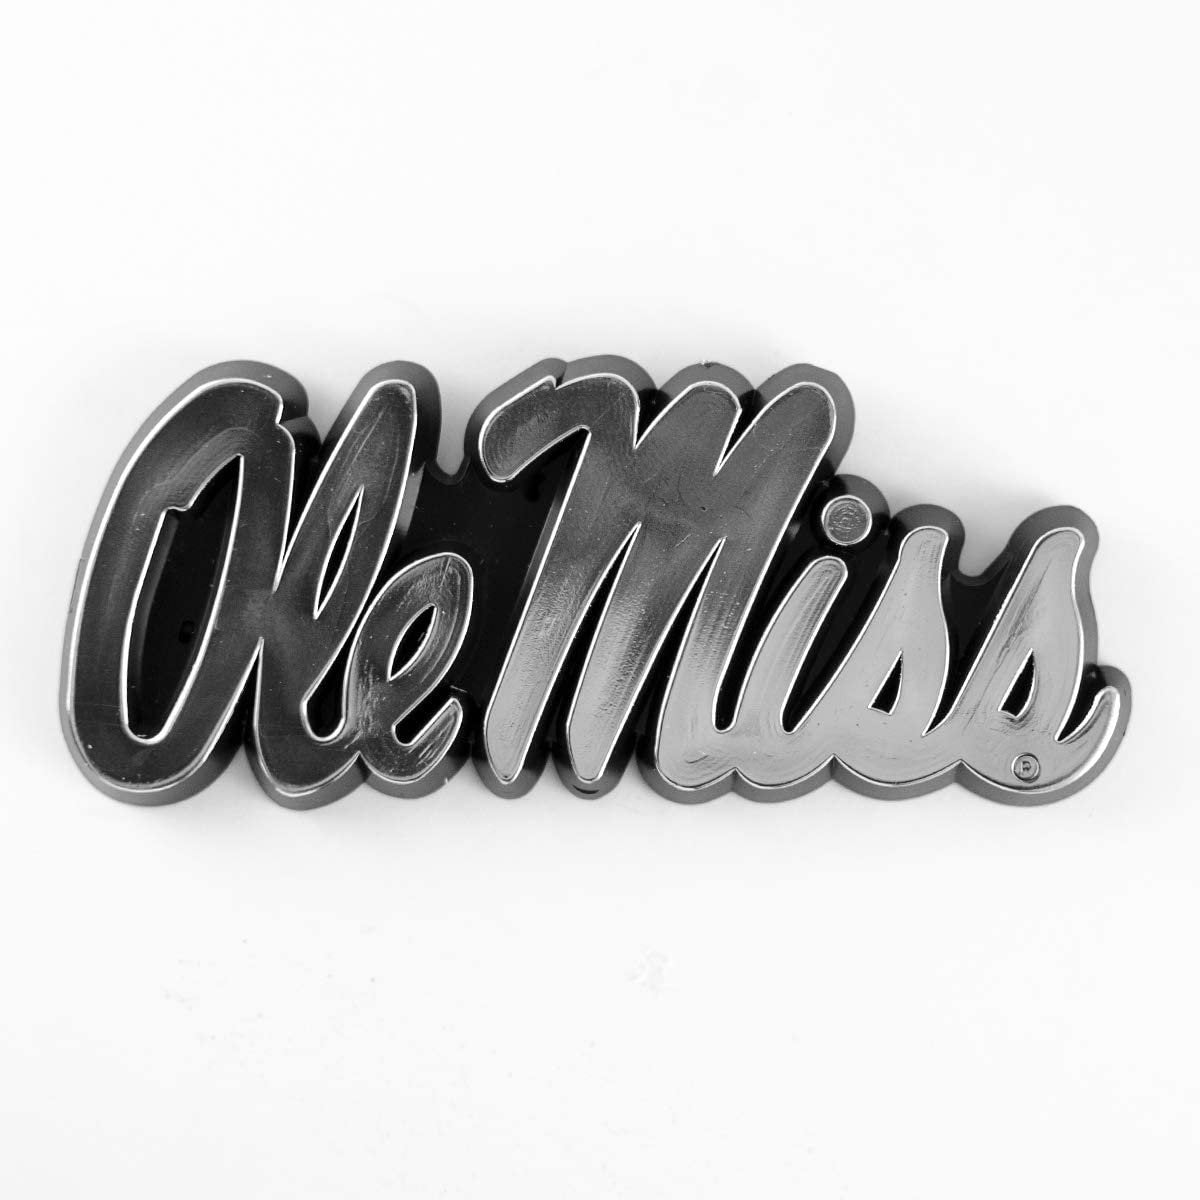 University of Mississippi Ole Miss Rebels Auto Emblem, Plastic Molded, Silver Chrome Color, Raised 3D Effect, Adhesive Backing